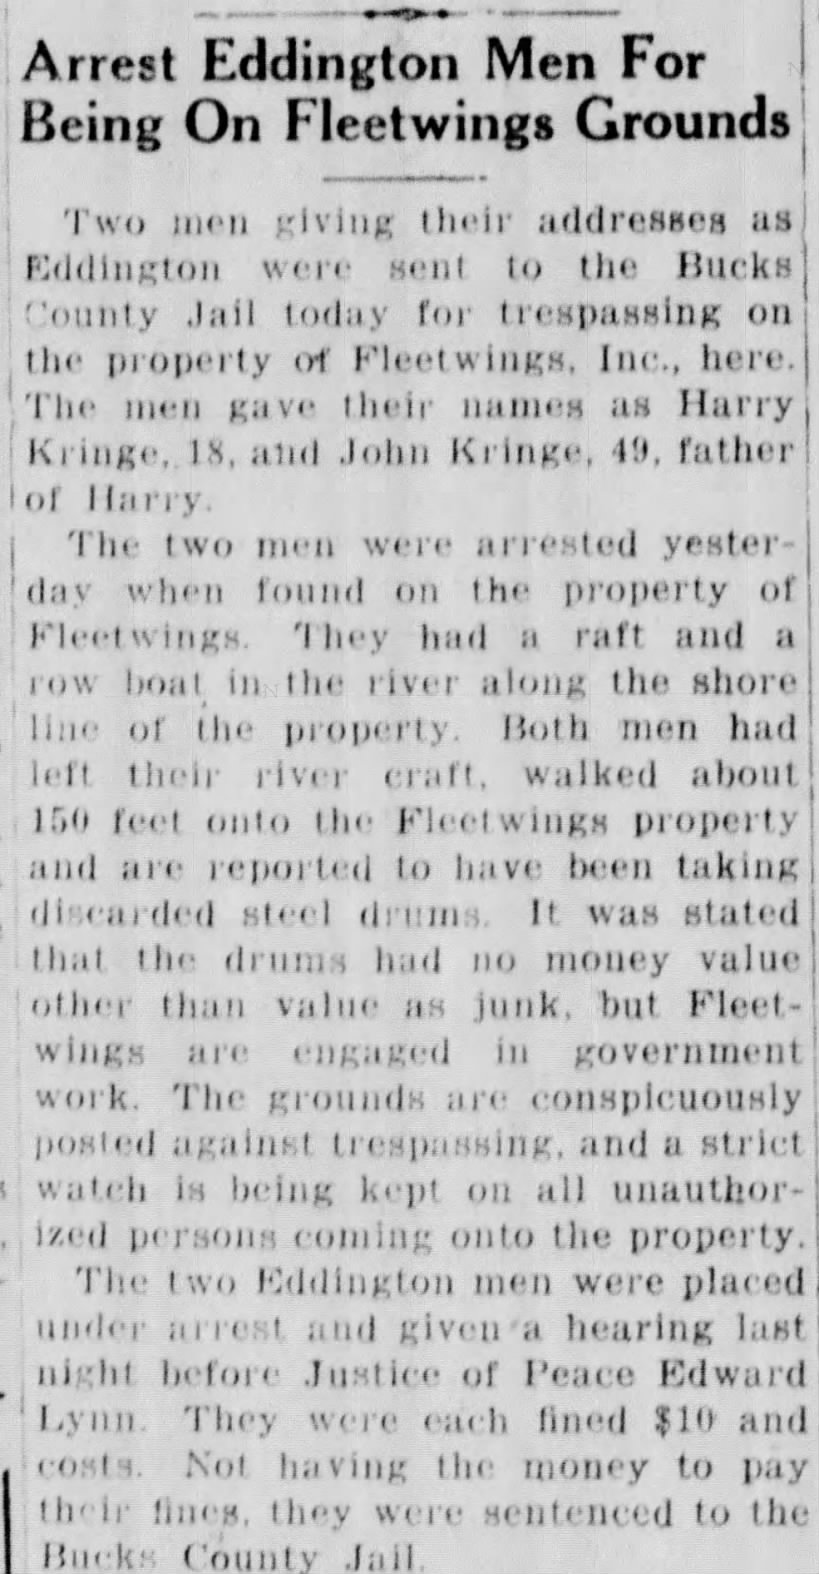 June 6, 1940
Bristol Daily Courier